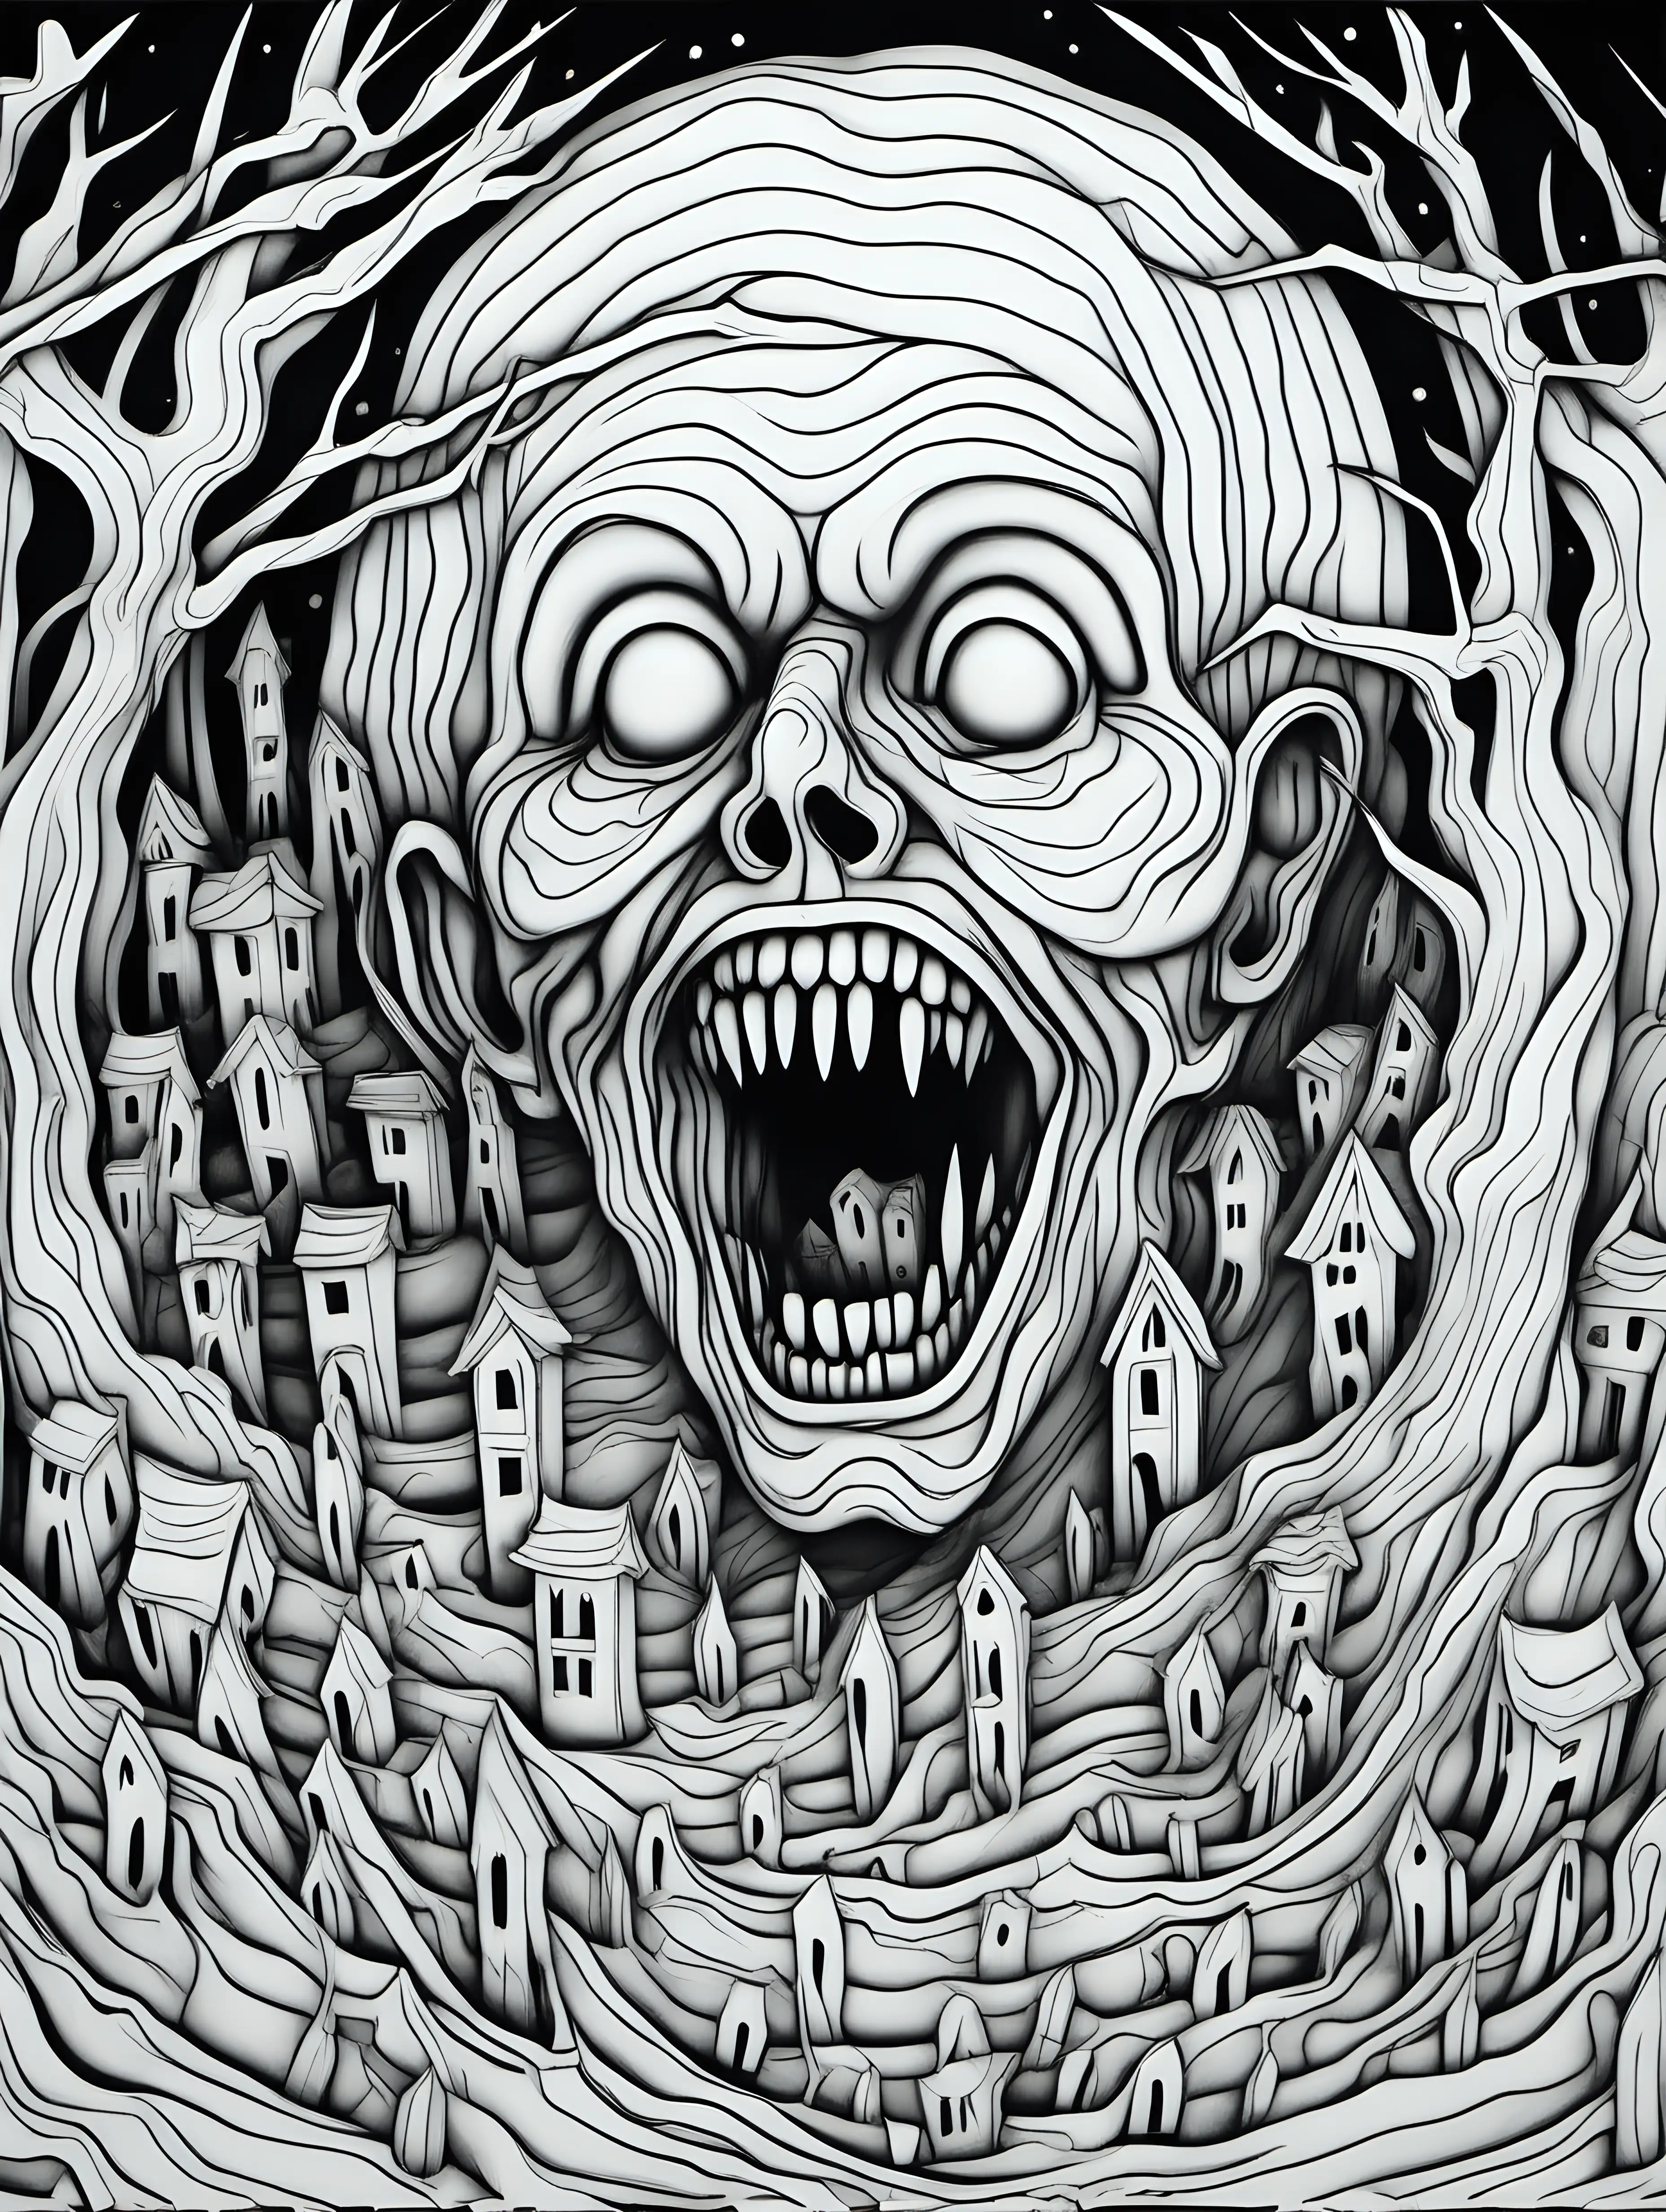 Adult 3D Horror Coloring Page with Intense Black Lines